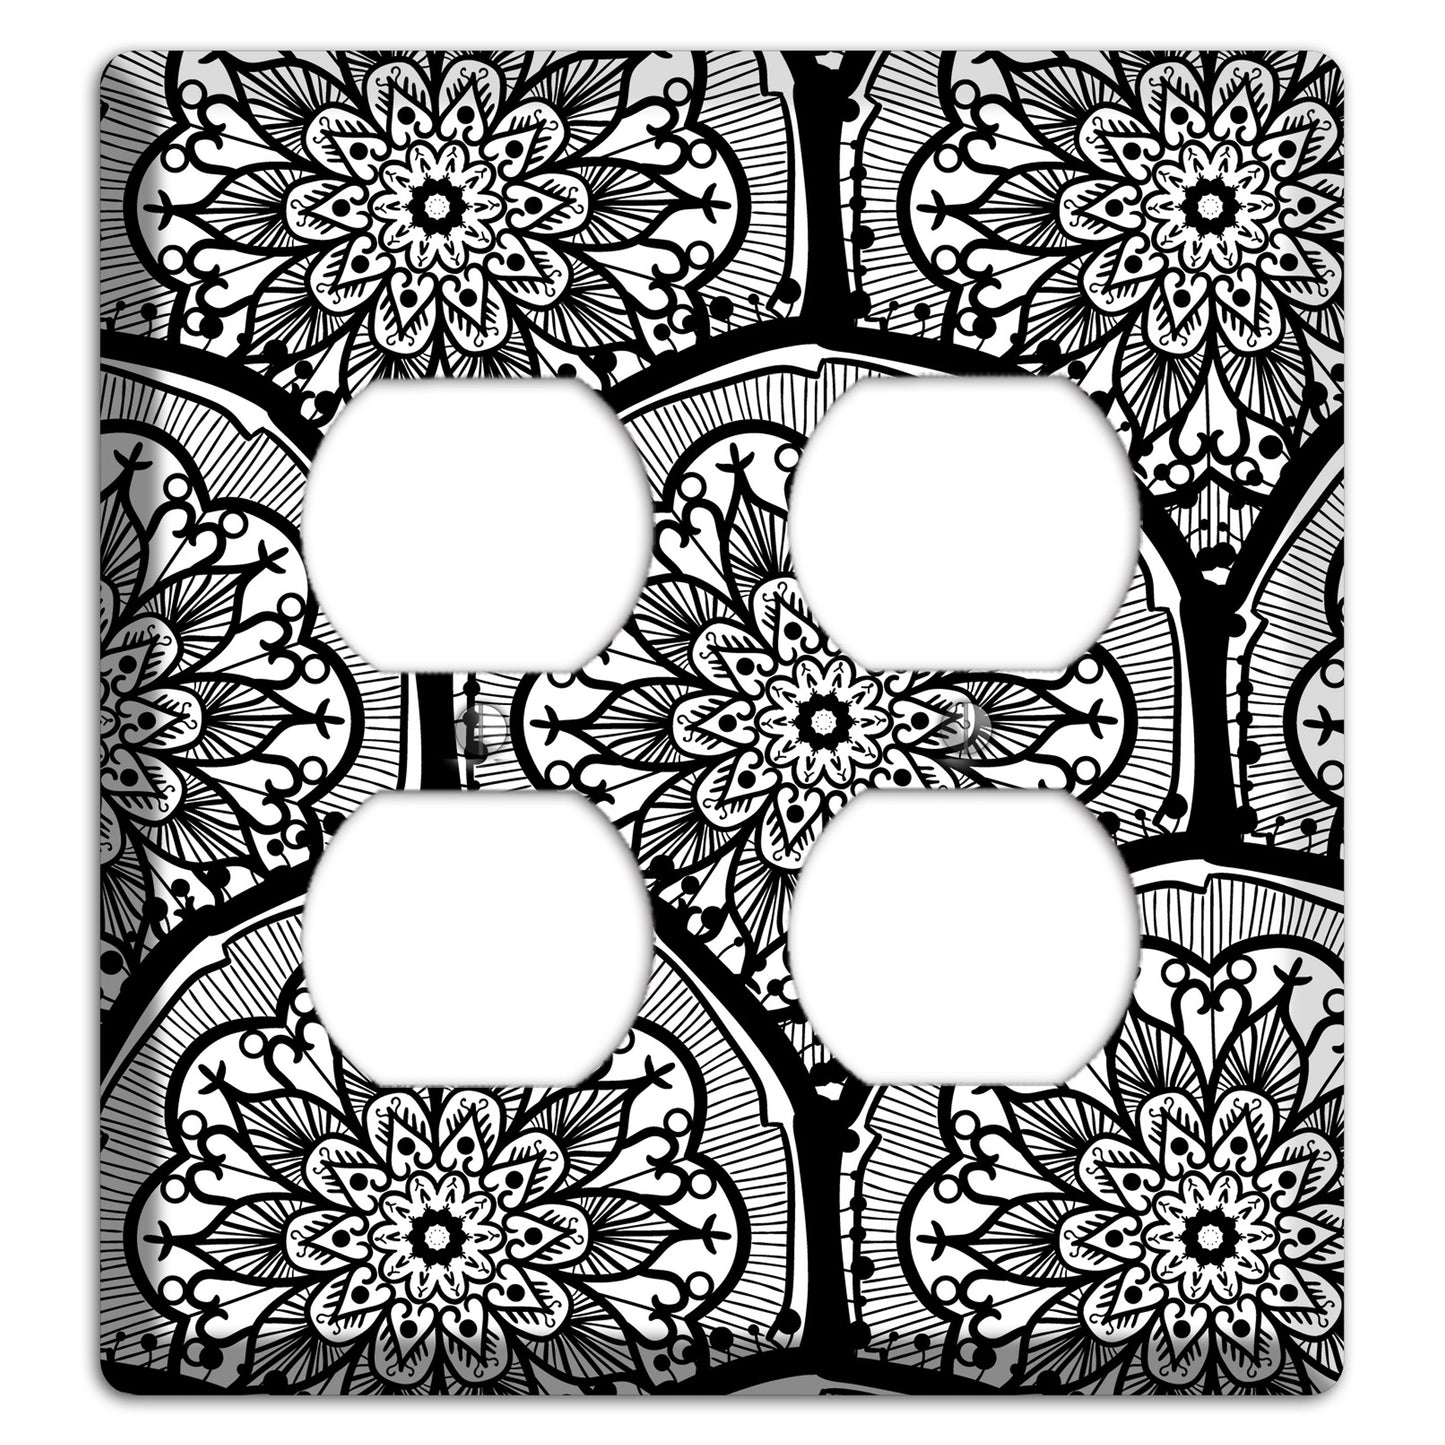 Mandala Black and White Style A Cover Plates 2 Duplex Wallplate